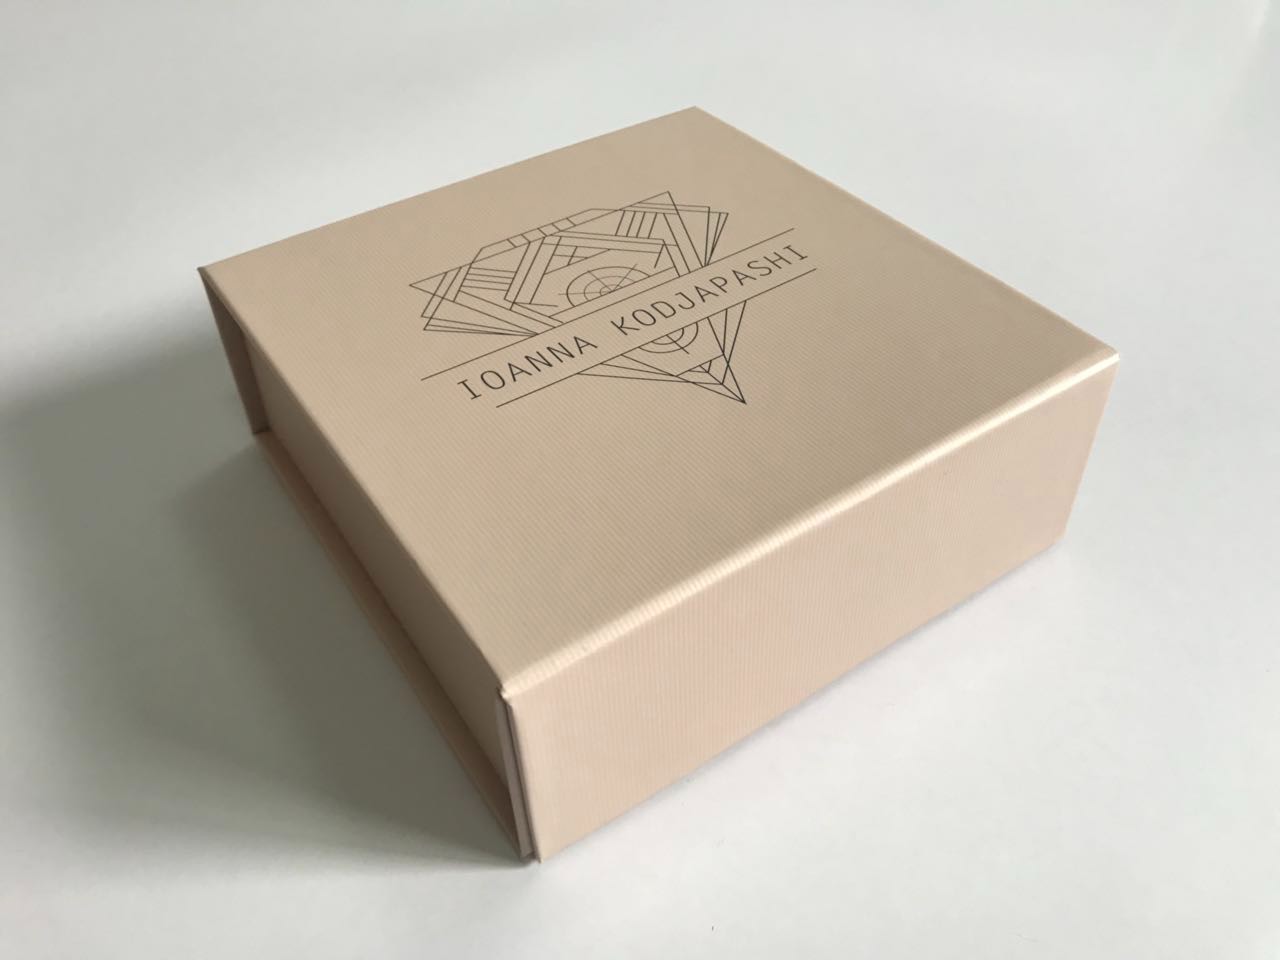 Foldable paper box Manufacturers, Foldable paper box Factory, Supply Foldable paper box